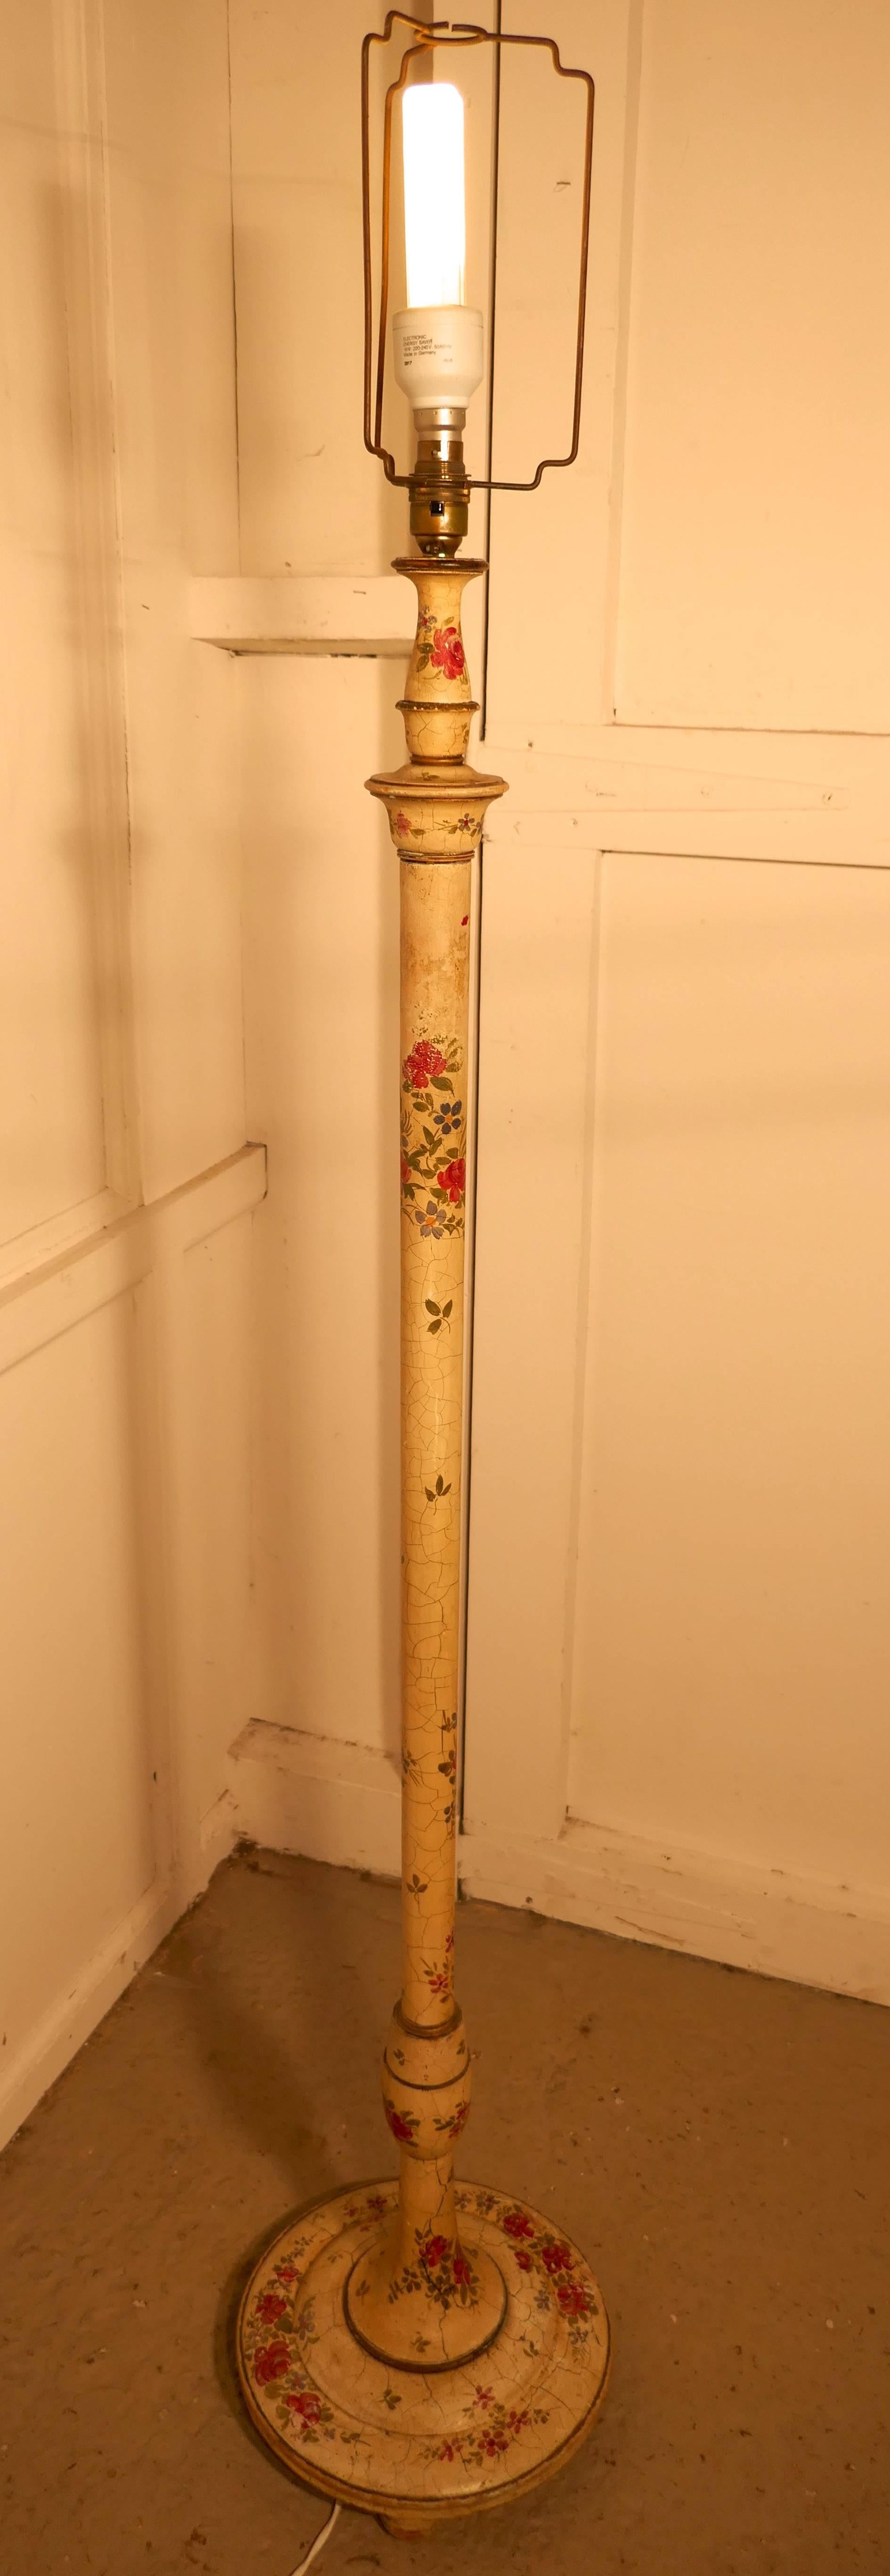 English 1920s Painted Floor Standing Lamp, Cream Red Roses Shabby Crackle Glazed Finish